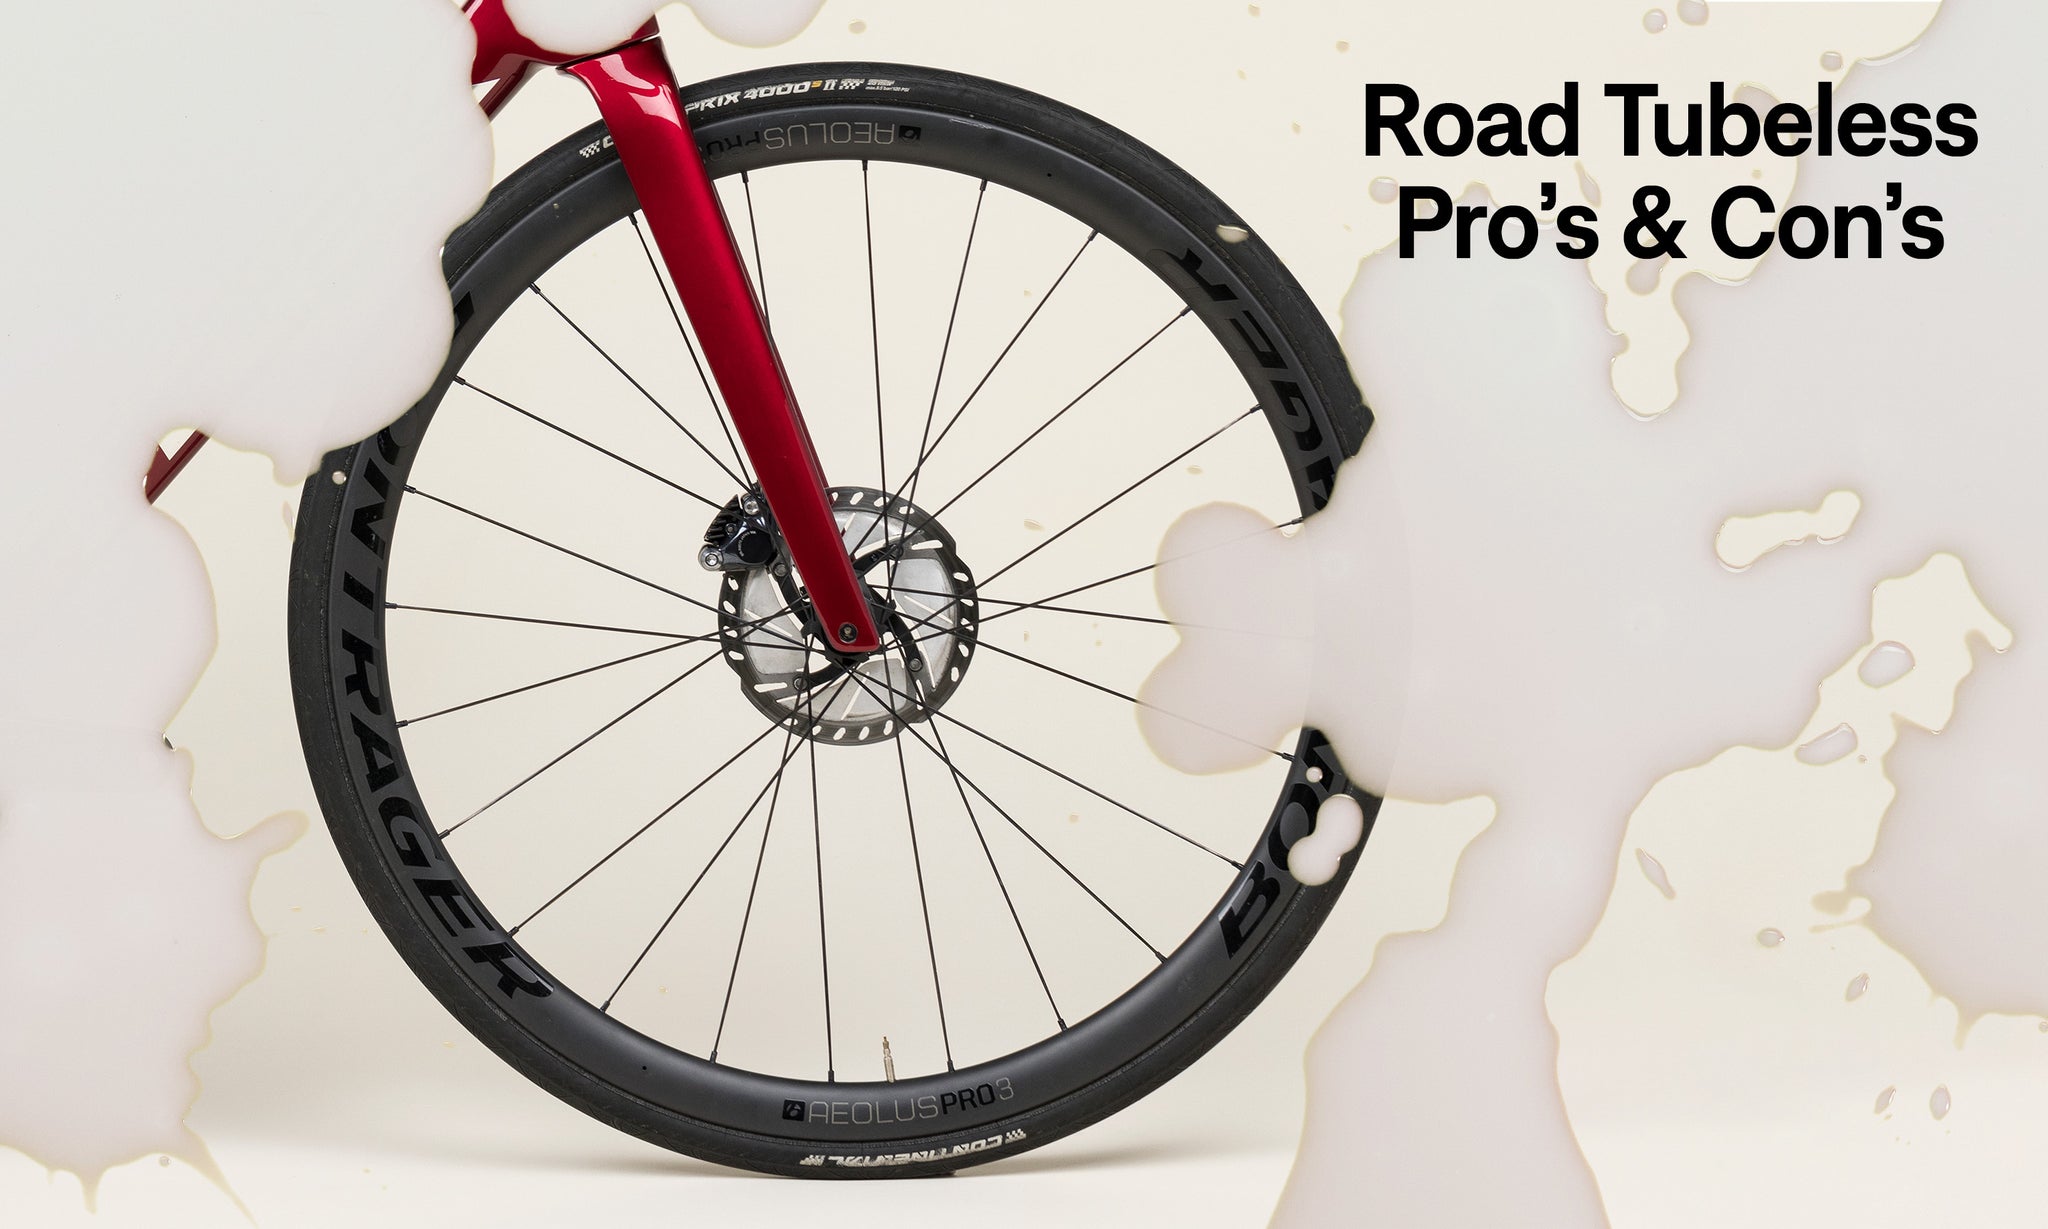 Are Tubeless Road Bike Tires Tires Worth It? The Pros & Cons